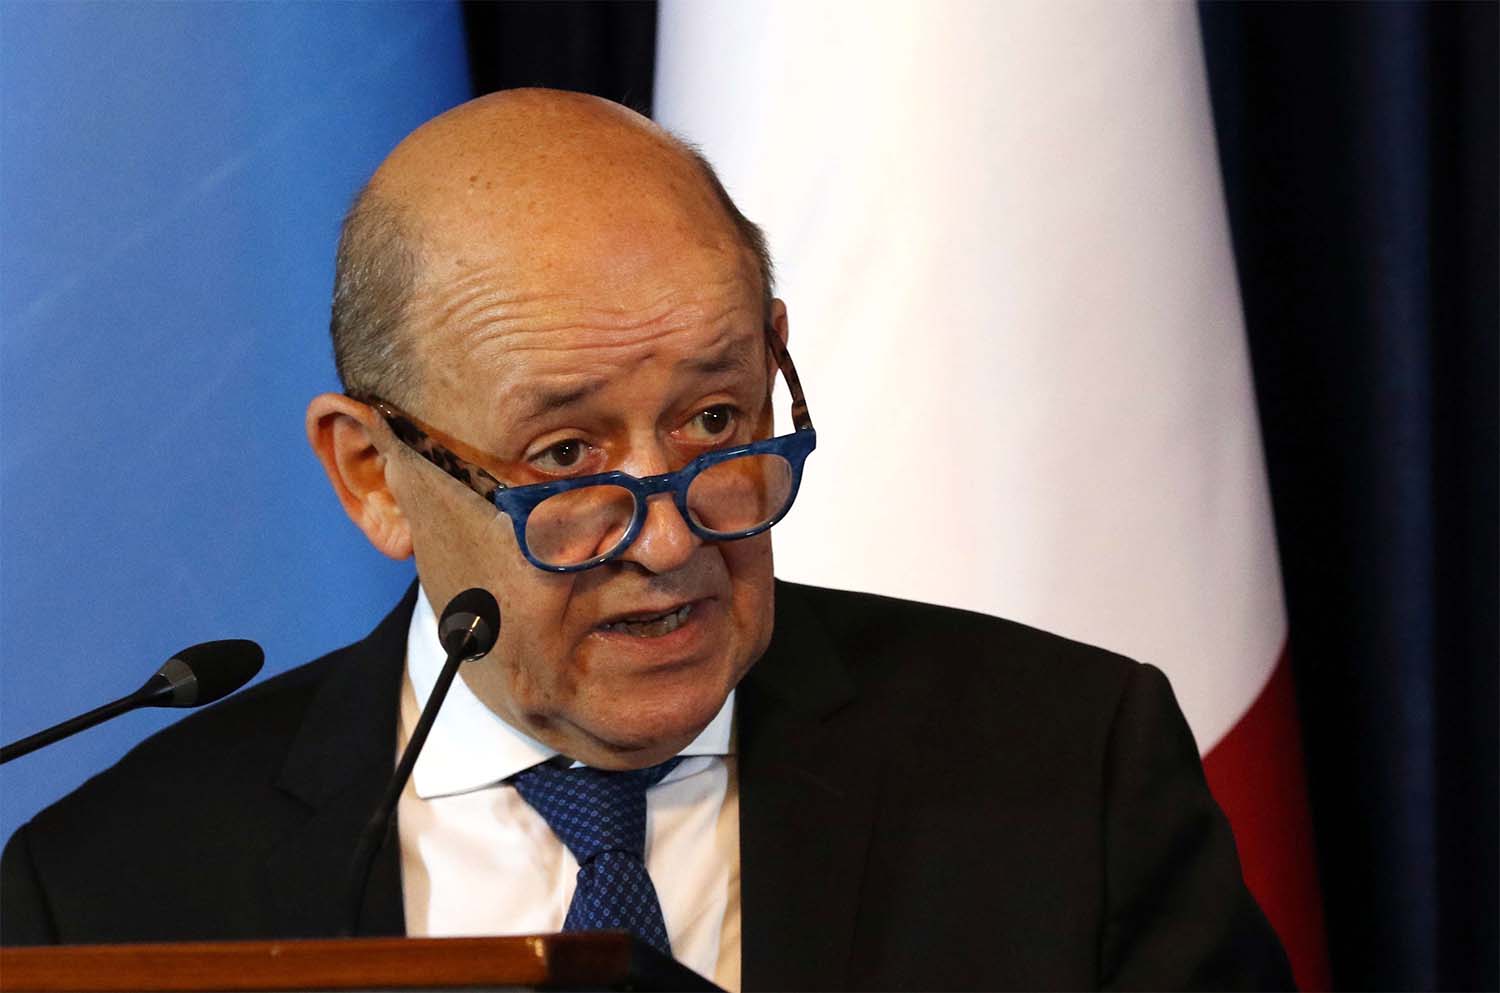 French Foreign Minister Jean-Yves Le Drian 